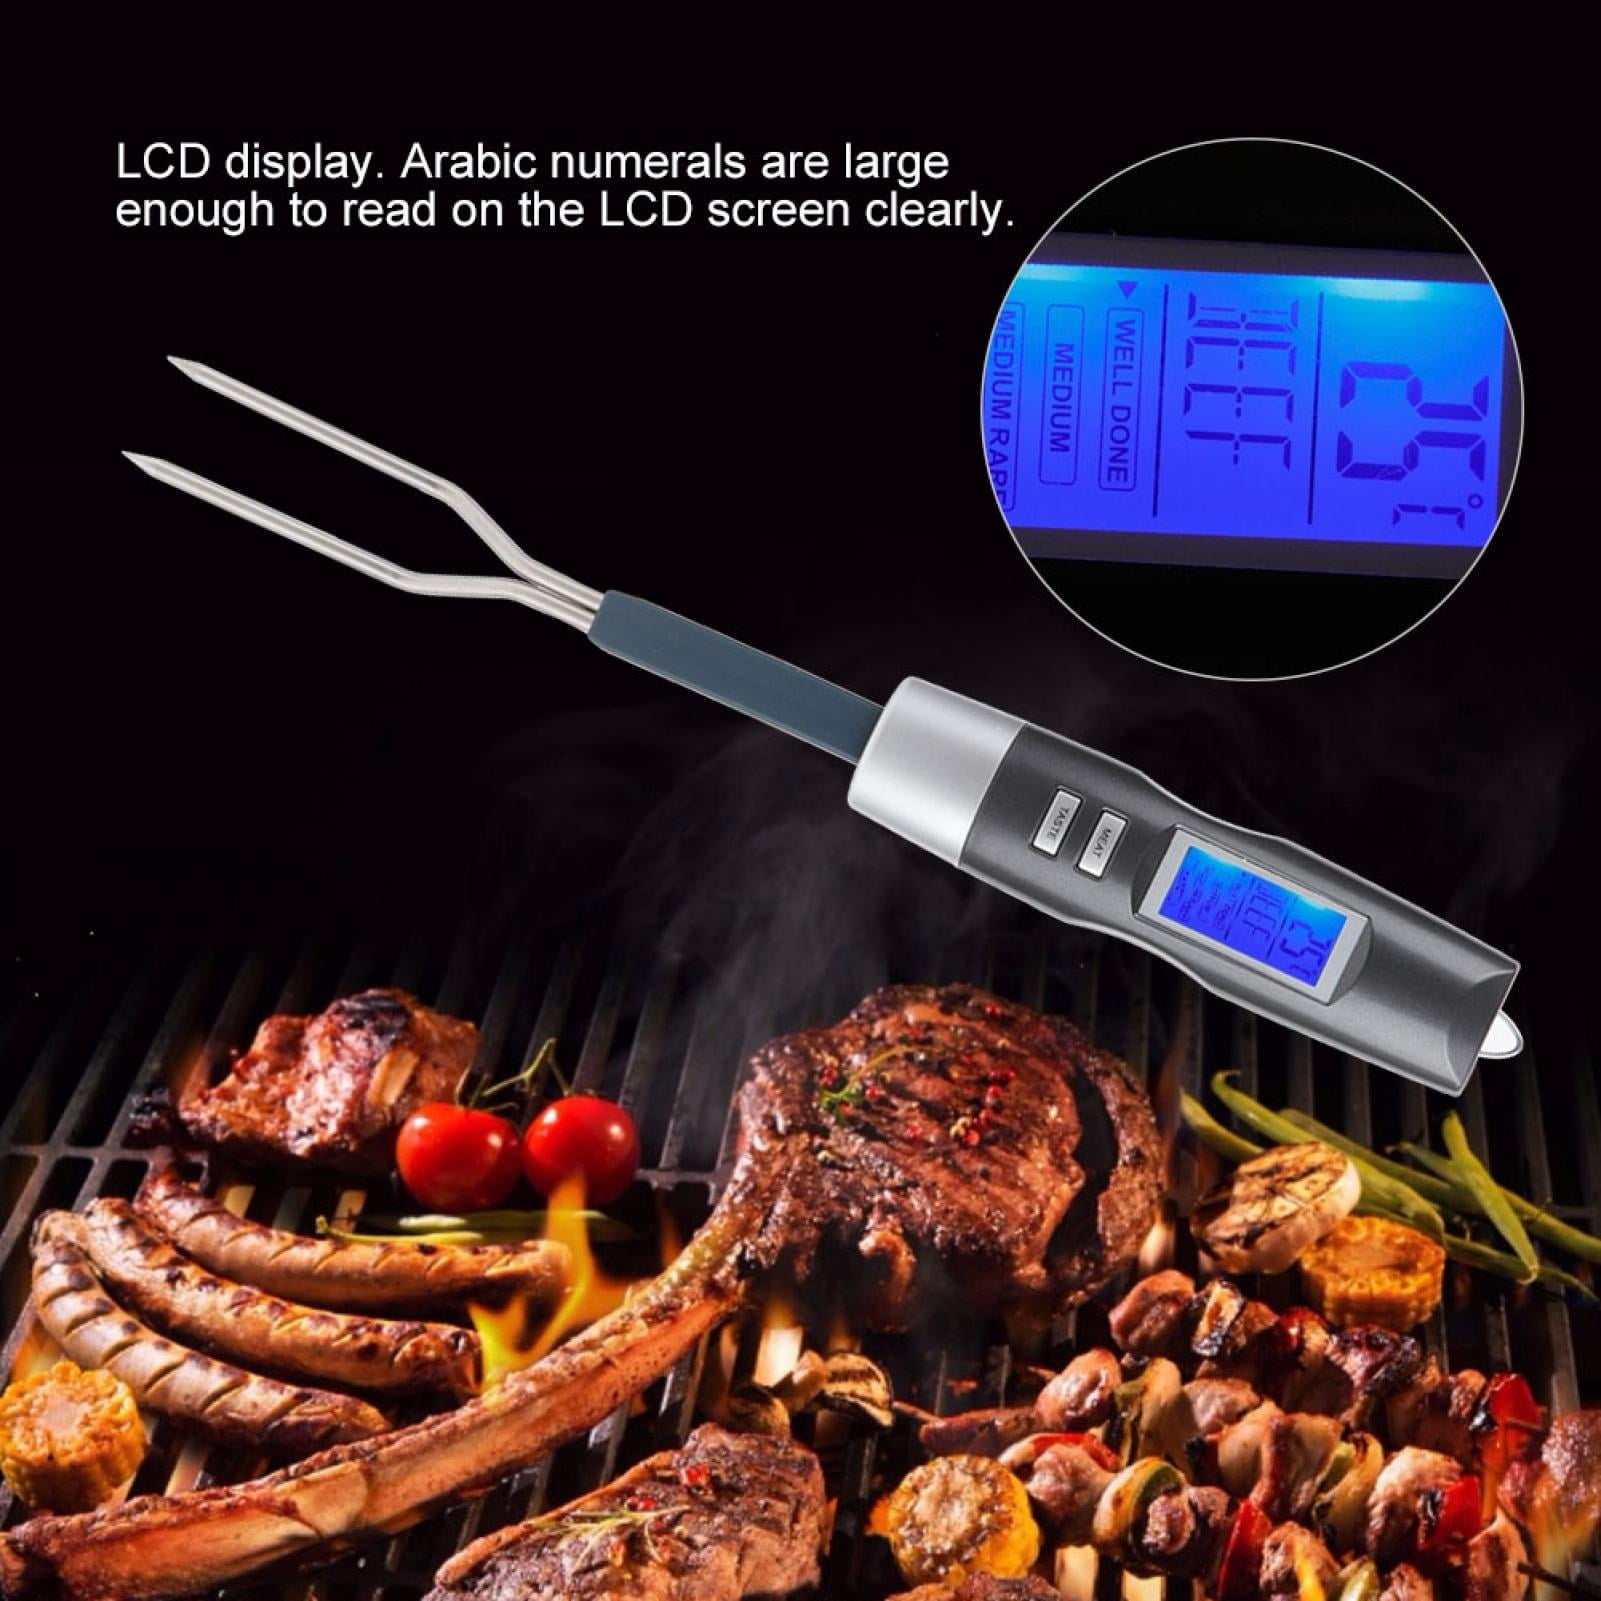 Kritne Digital BBQ Meat Thermometer Fork Grill Fork with LCD Disply,  Thermometer Grill Fork, Meat Thermometer Fork 